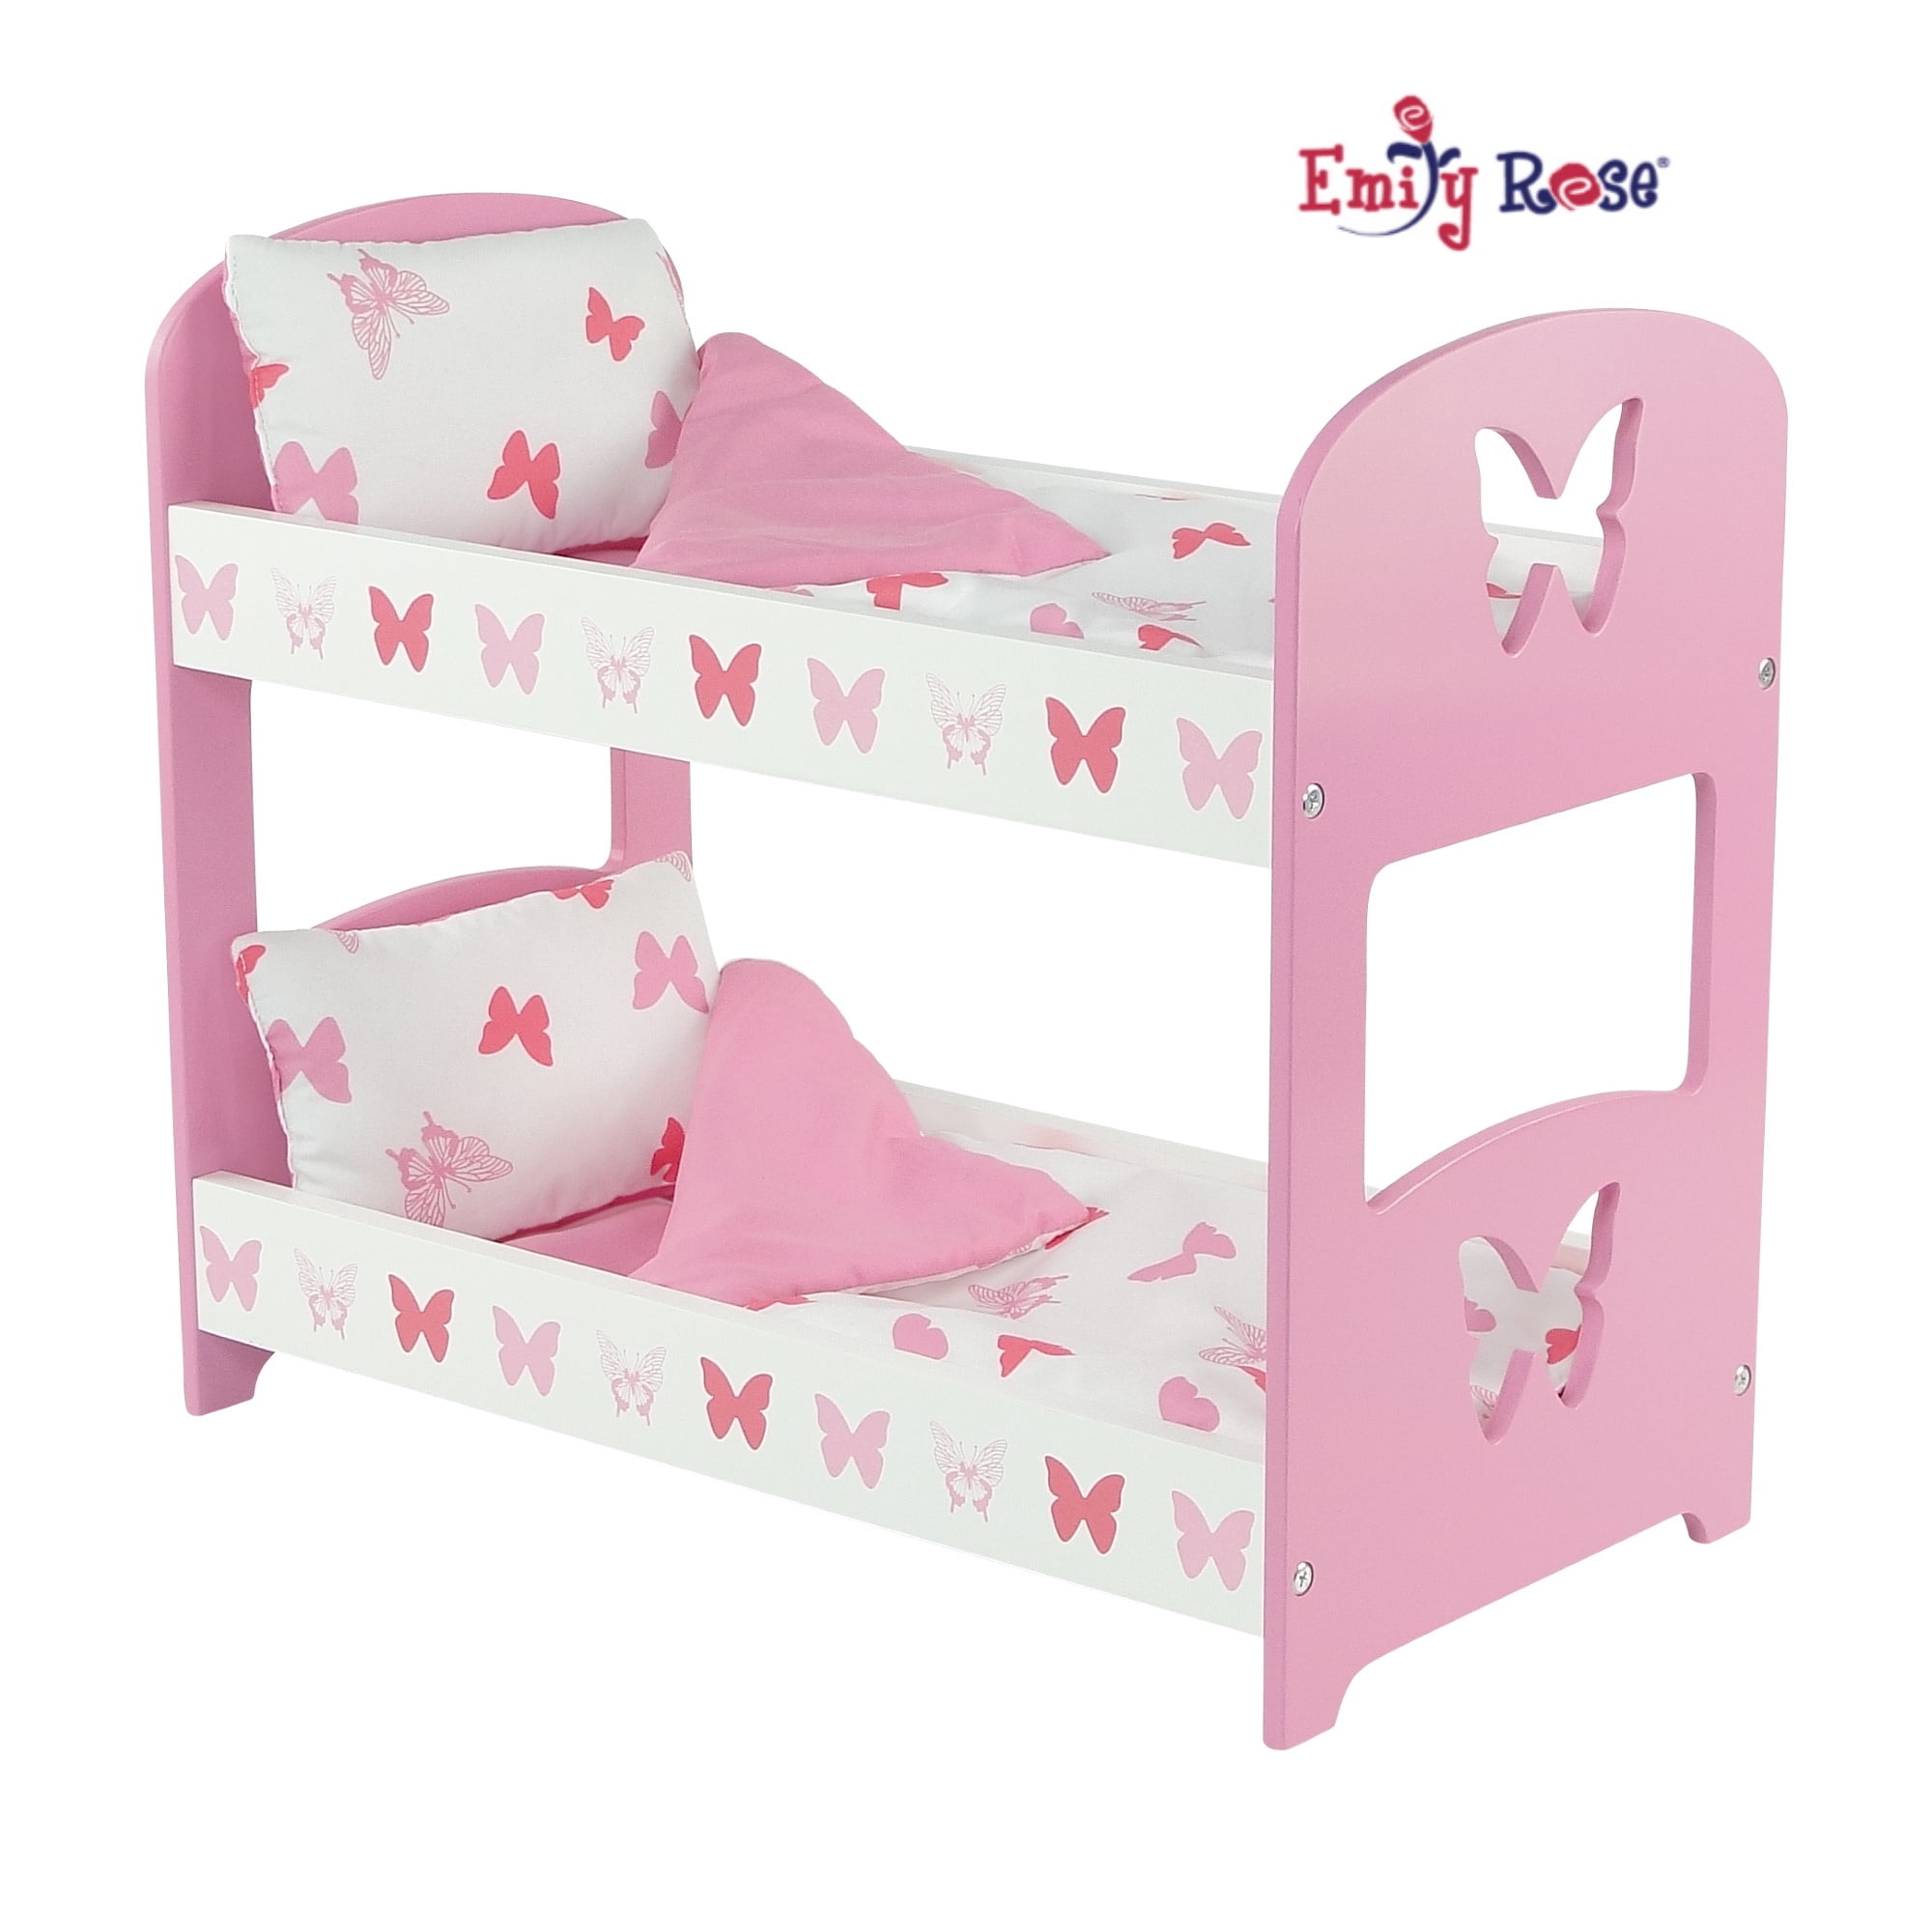 Emily Rose 18 Inch Doll Bed Com, Bunk Beds For Journey Dolls